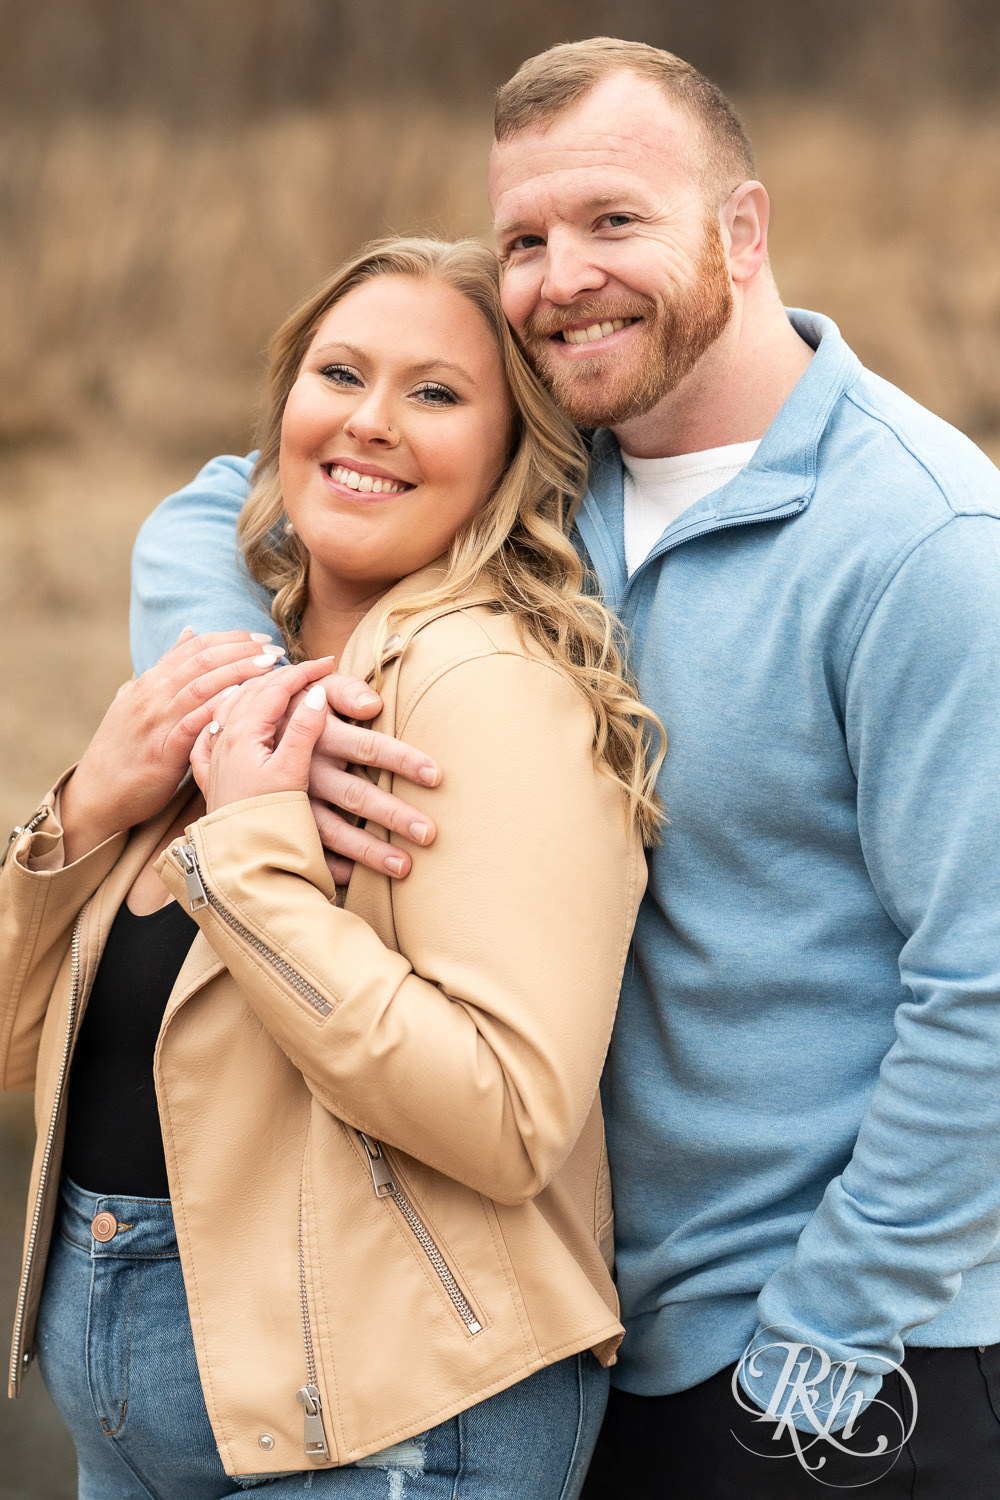 Man in blue shirt and woman in jeans smile during engagement photography at Rice Creek Regional Trail in Shoreview, Minnesota.